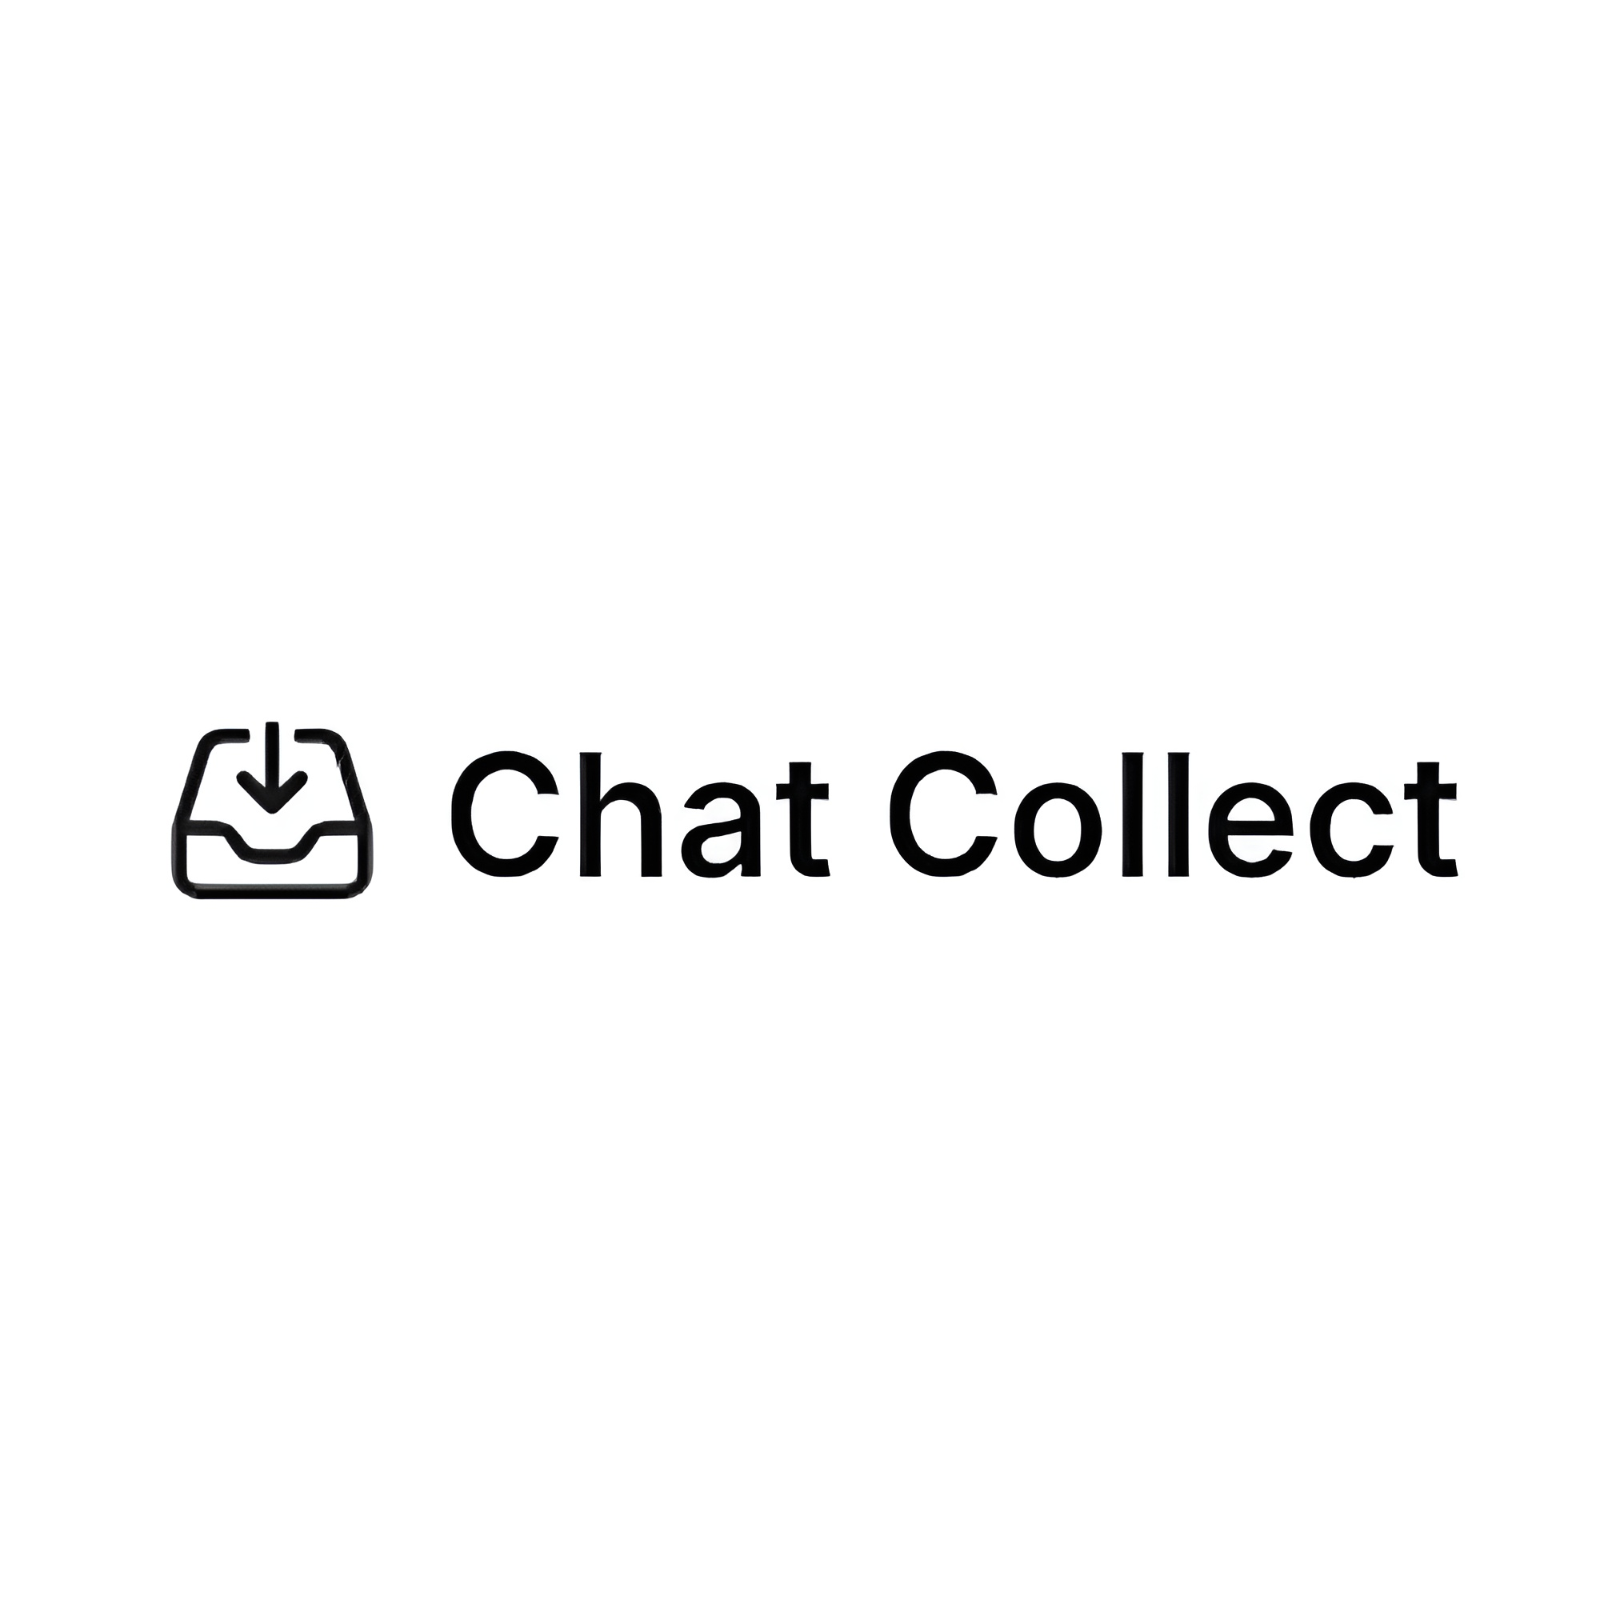 Chat Collect